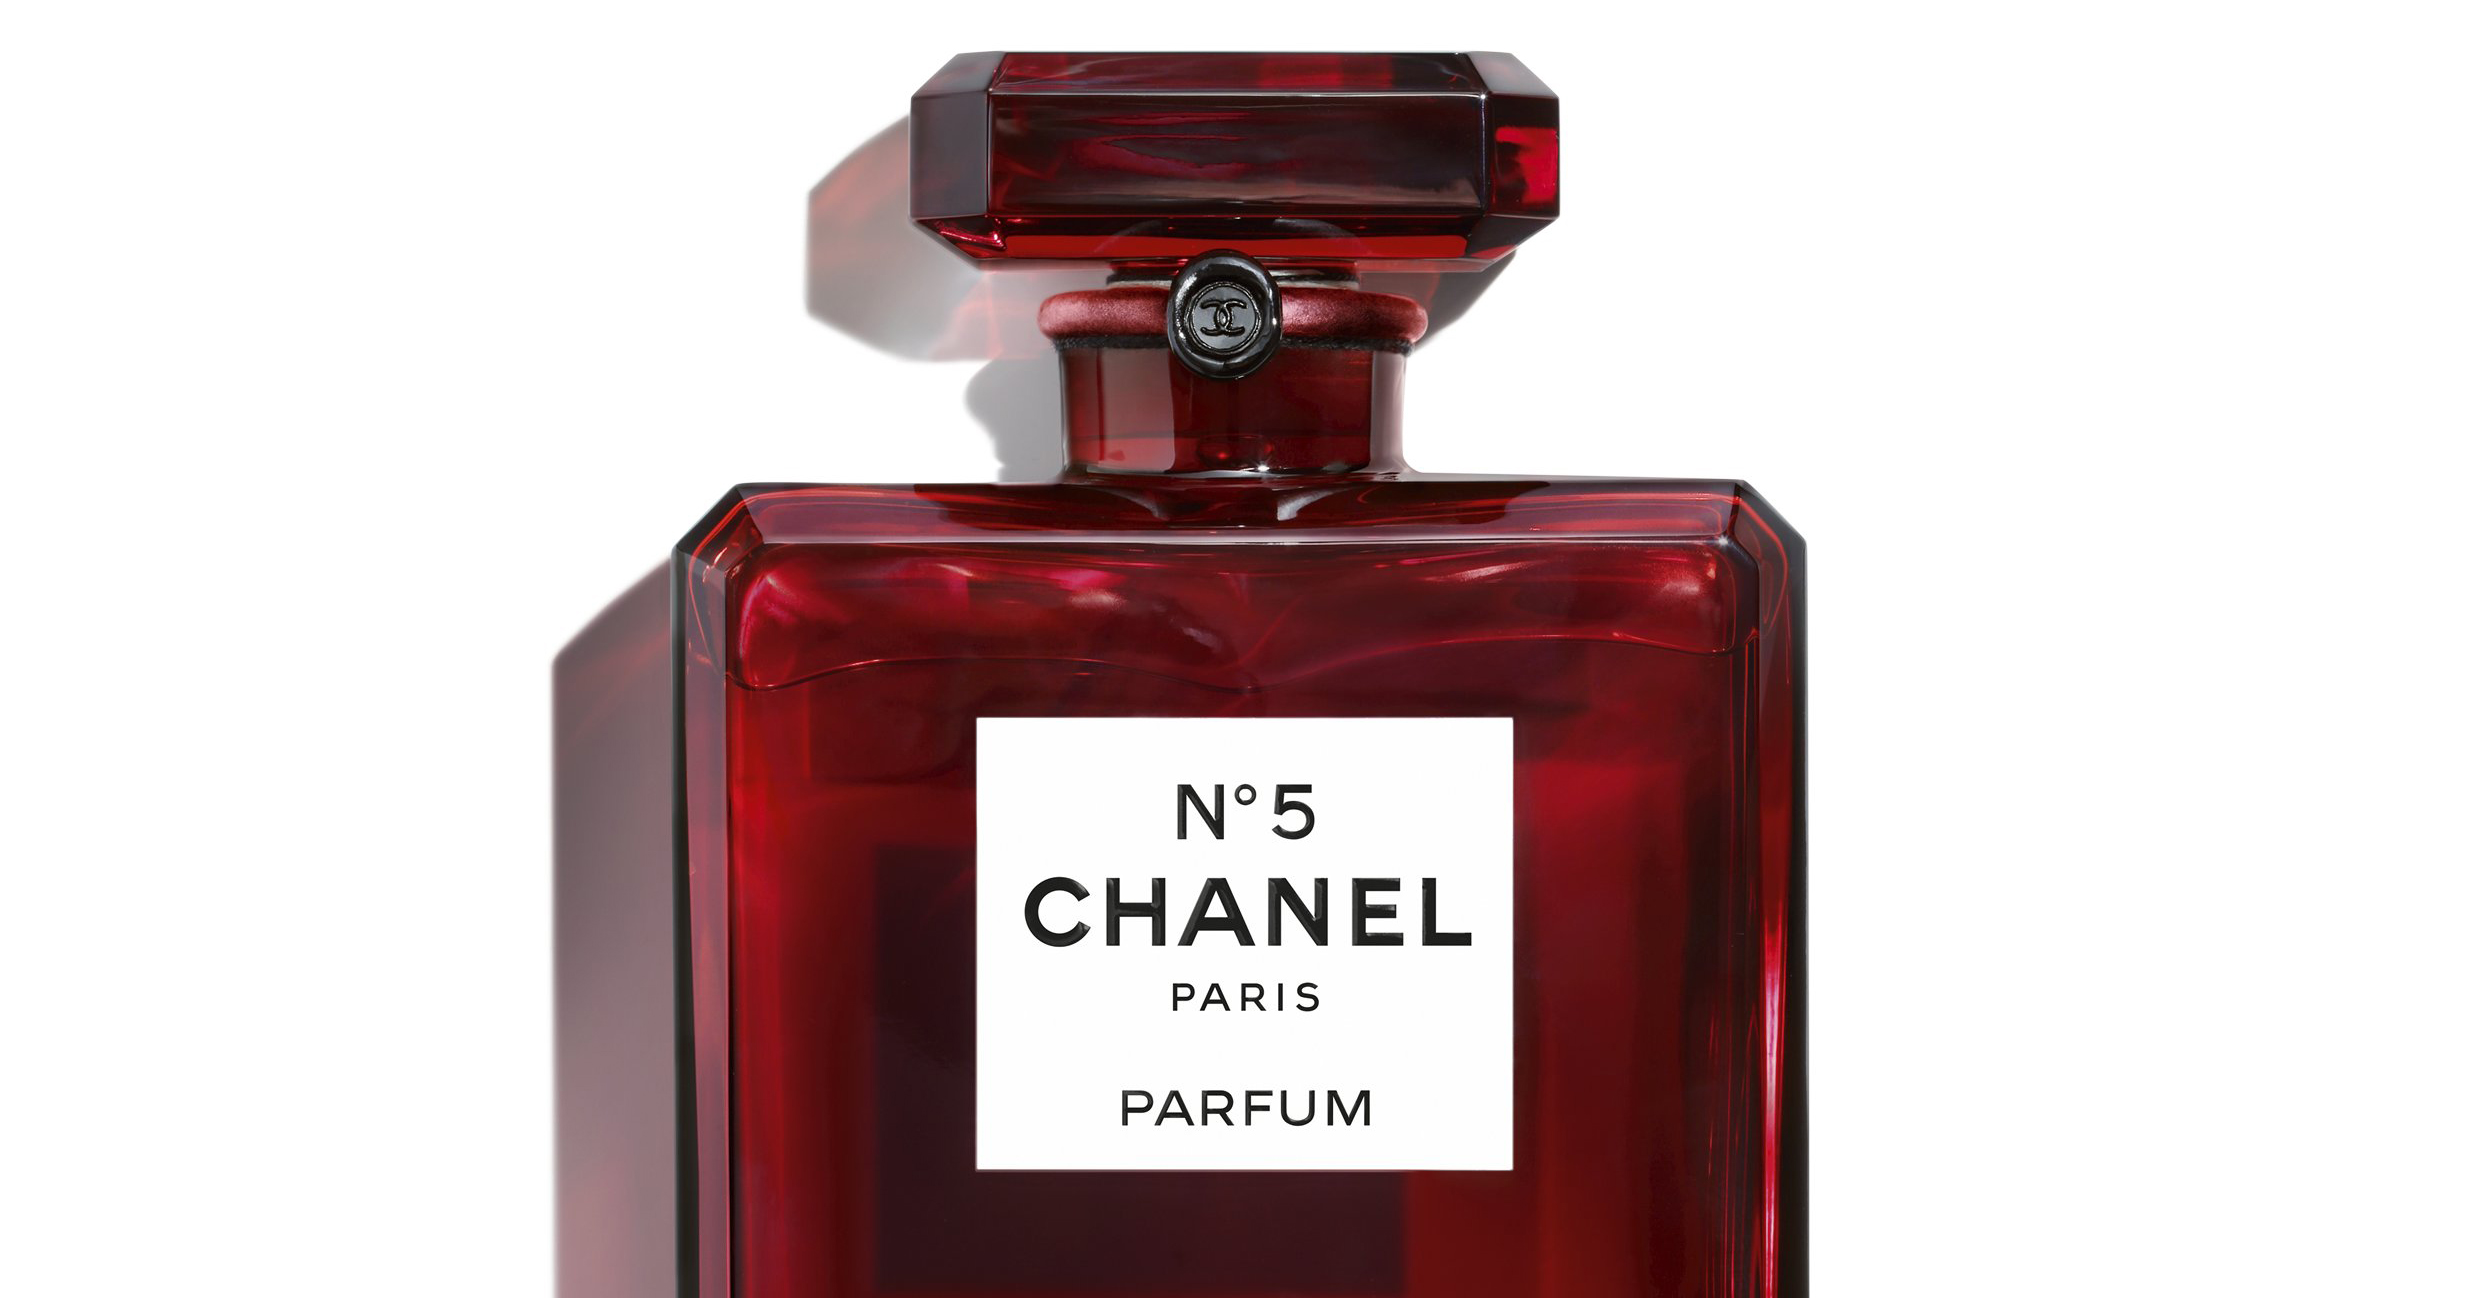 The limited edition Chanel No. 5 Grand Extrait - Hashtag Legend